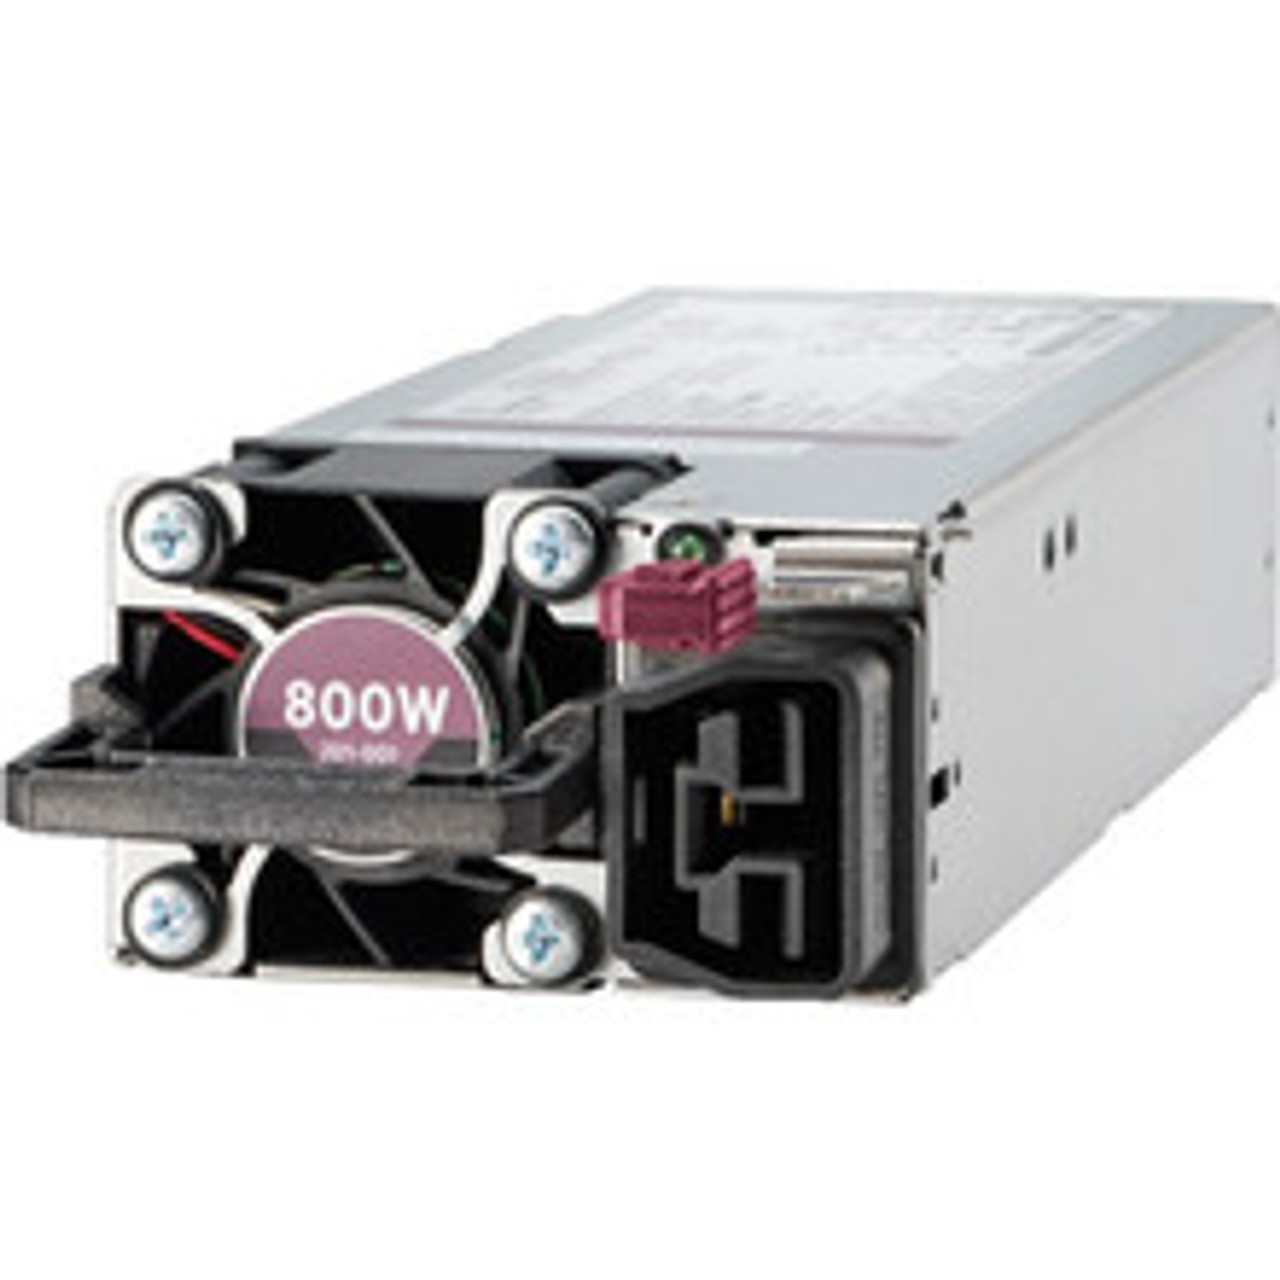 HPE 800W FS Plat Hot plugable LH Reman PS Kit (Sourcing) - HPE Discontinued Product)